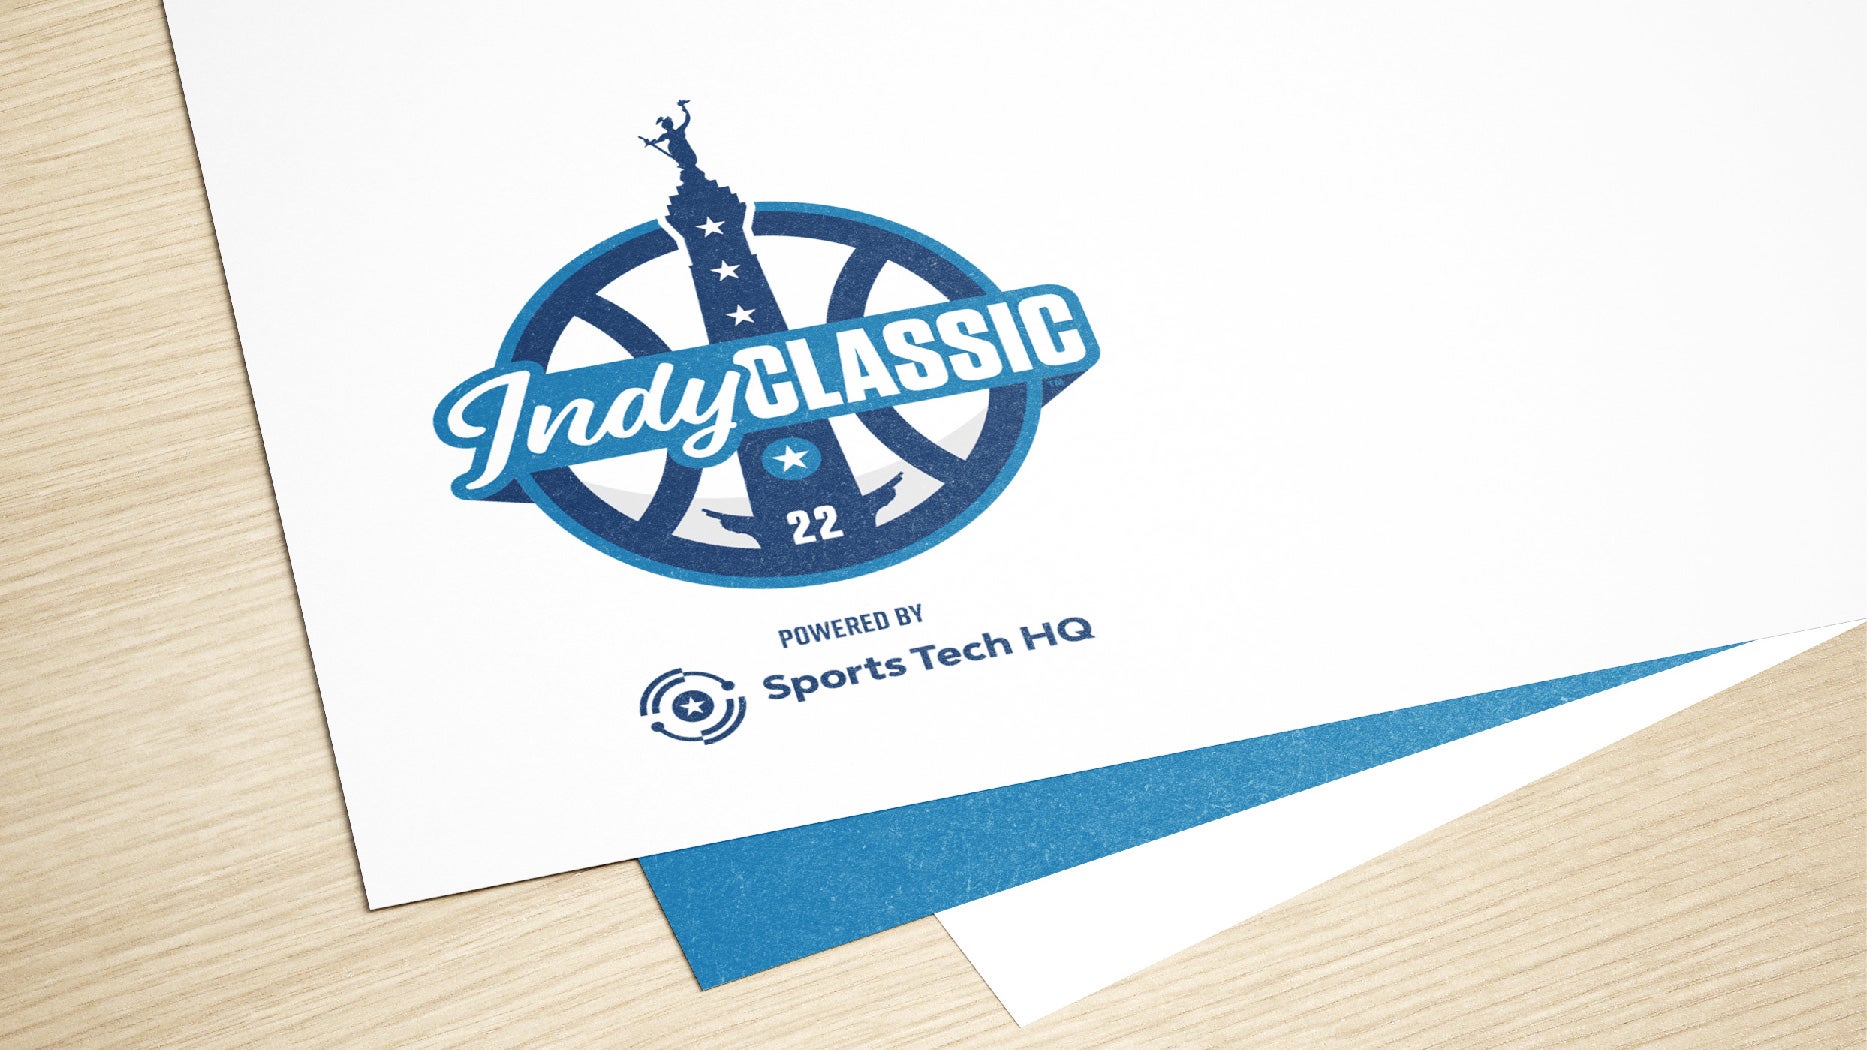 Sports Tech HQ Named Presenting Sponsor of Indy Classic